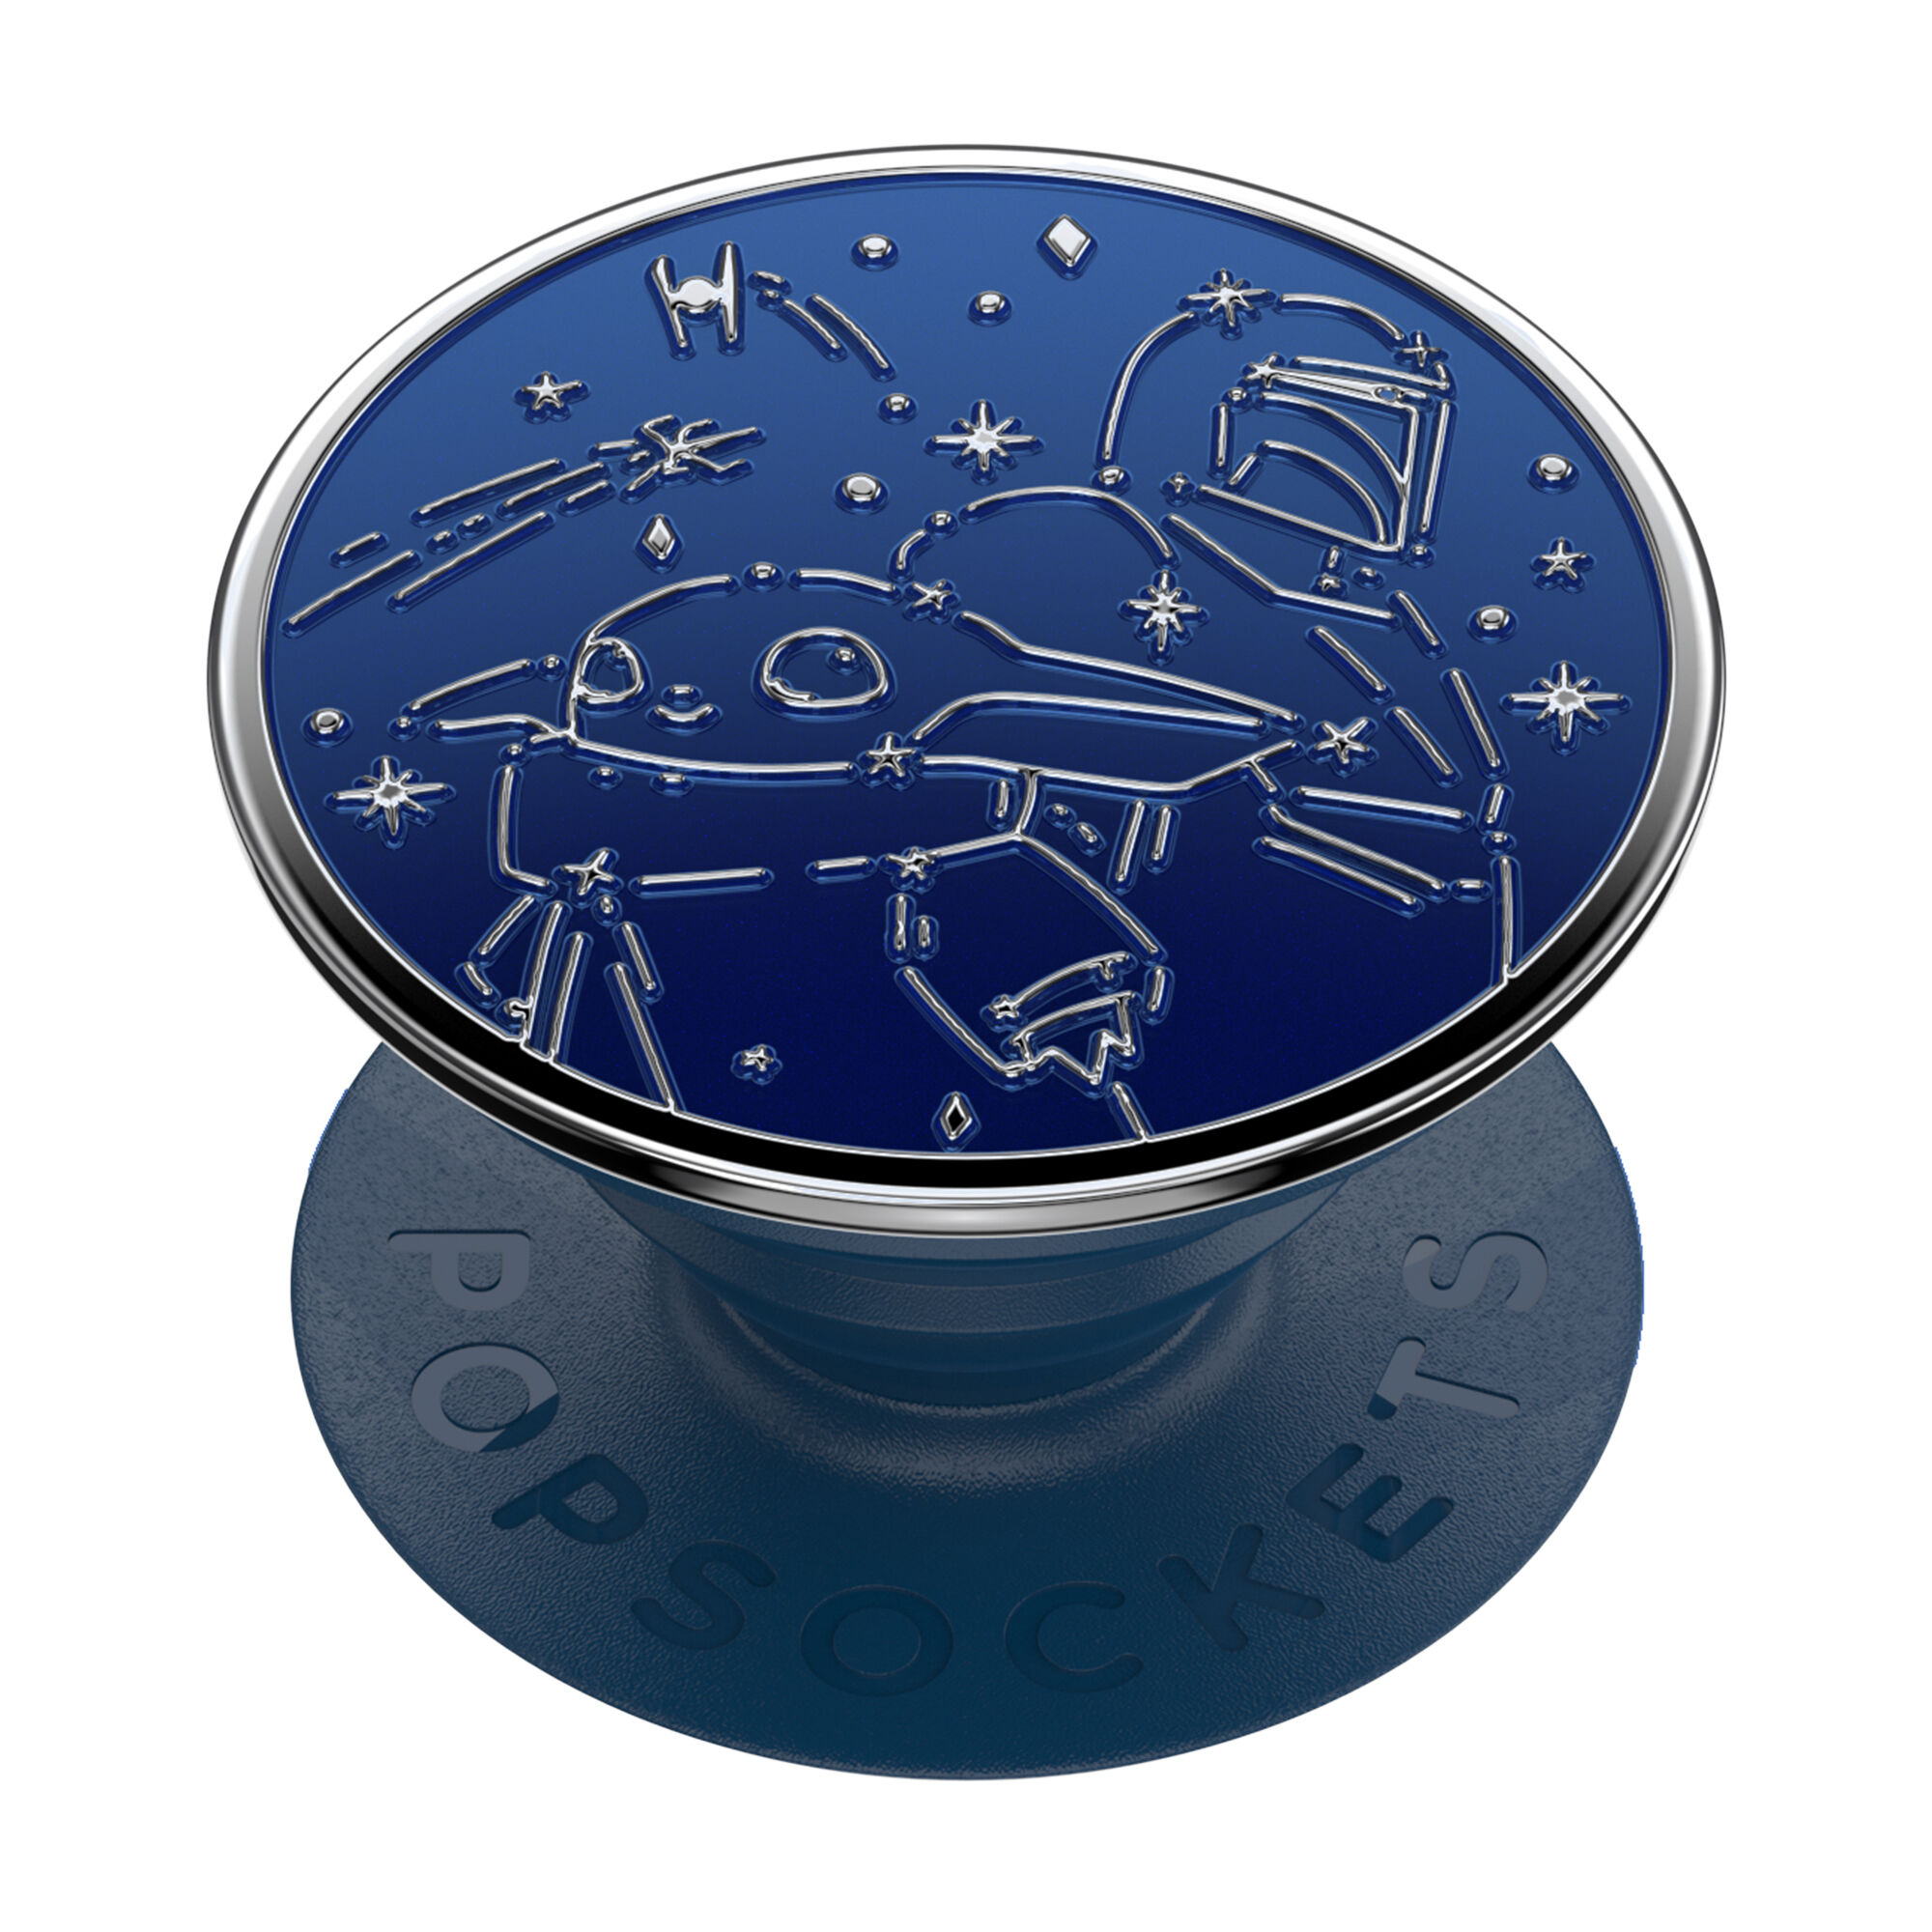 View Claires Popsockets Popgrip Enamel Night Star Wars The Mandalorian information